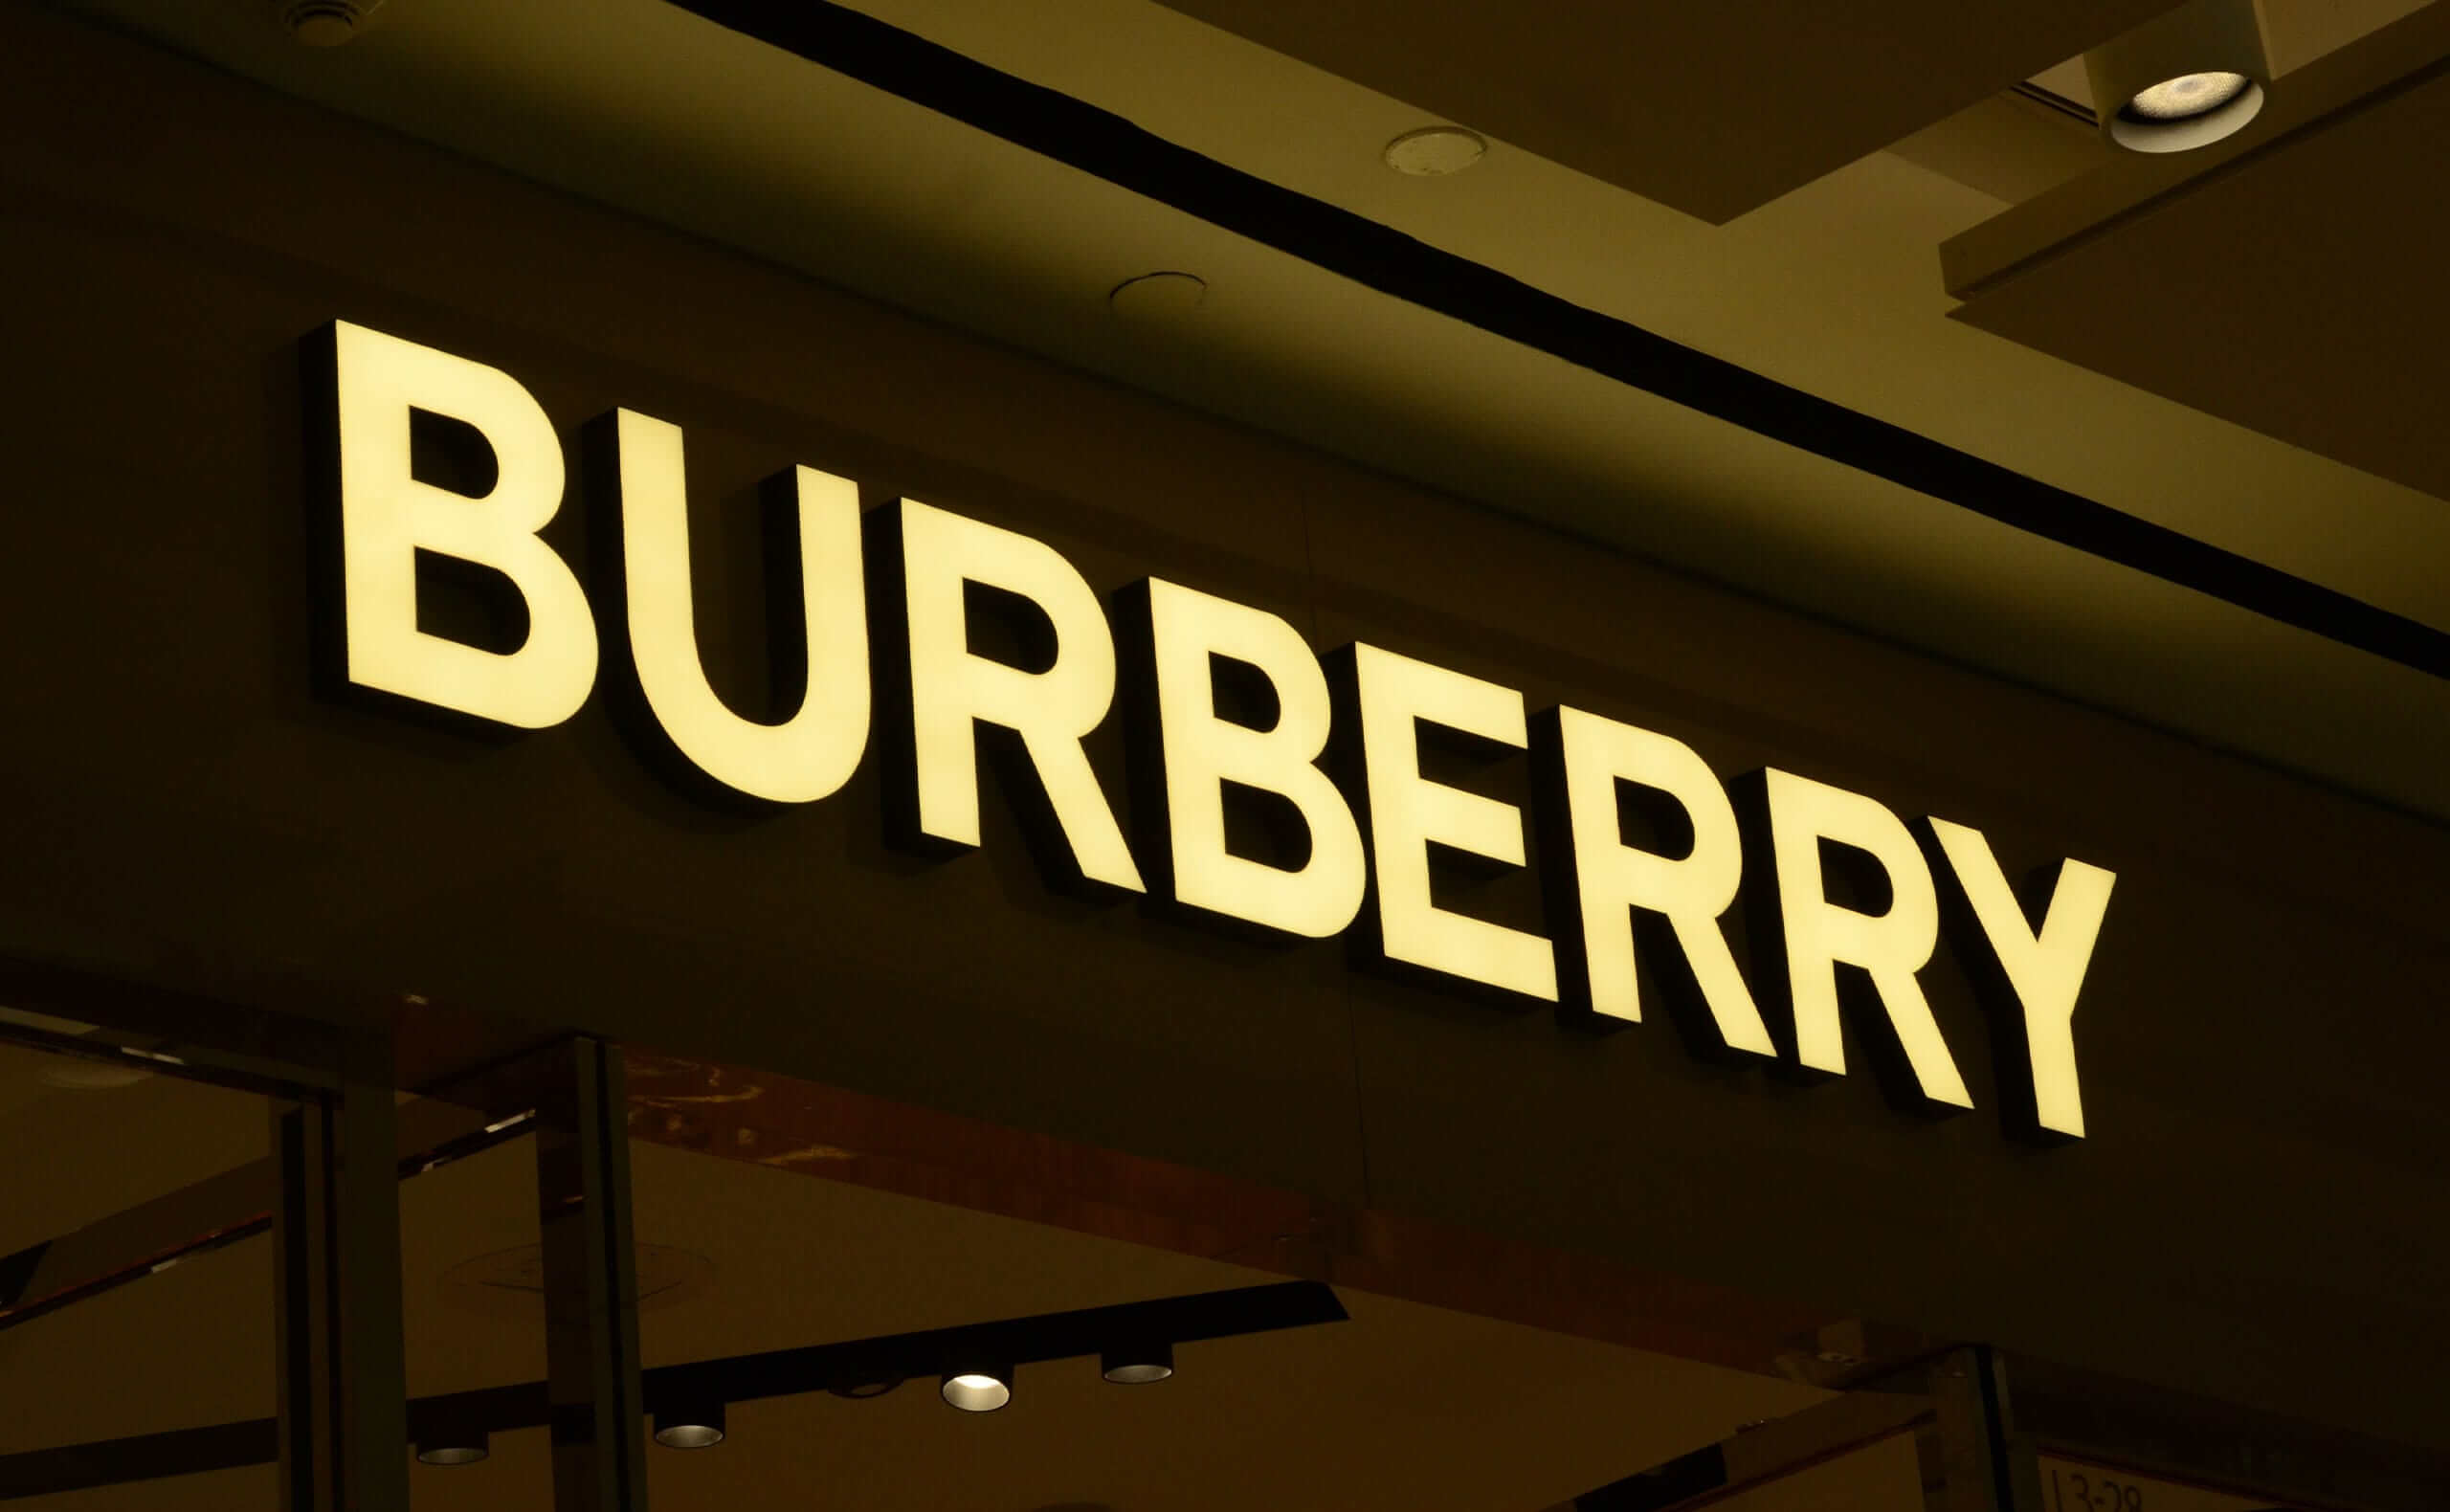 Metal Front Lit Trimless Channel Letters For Burberry